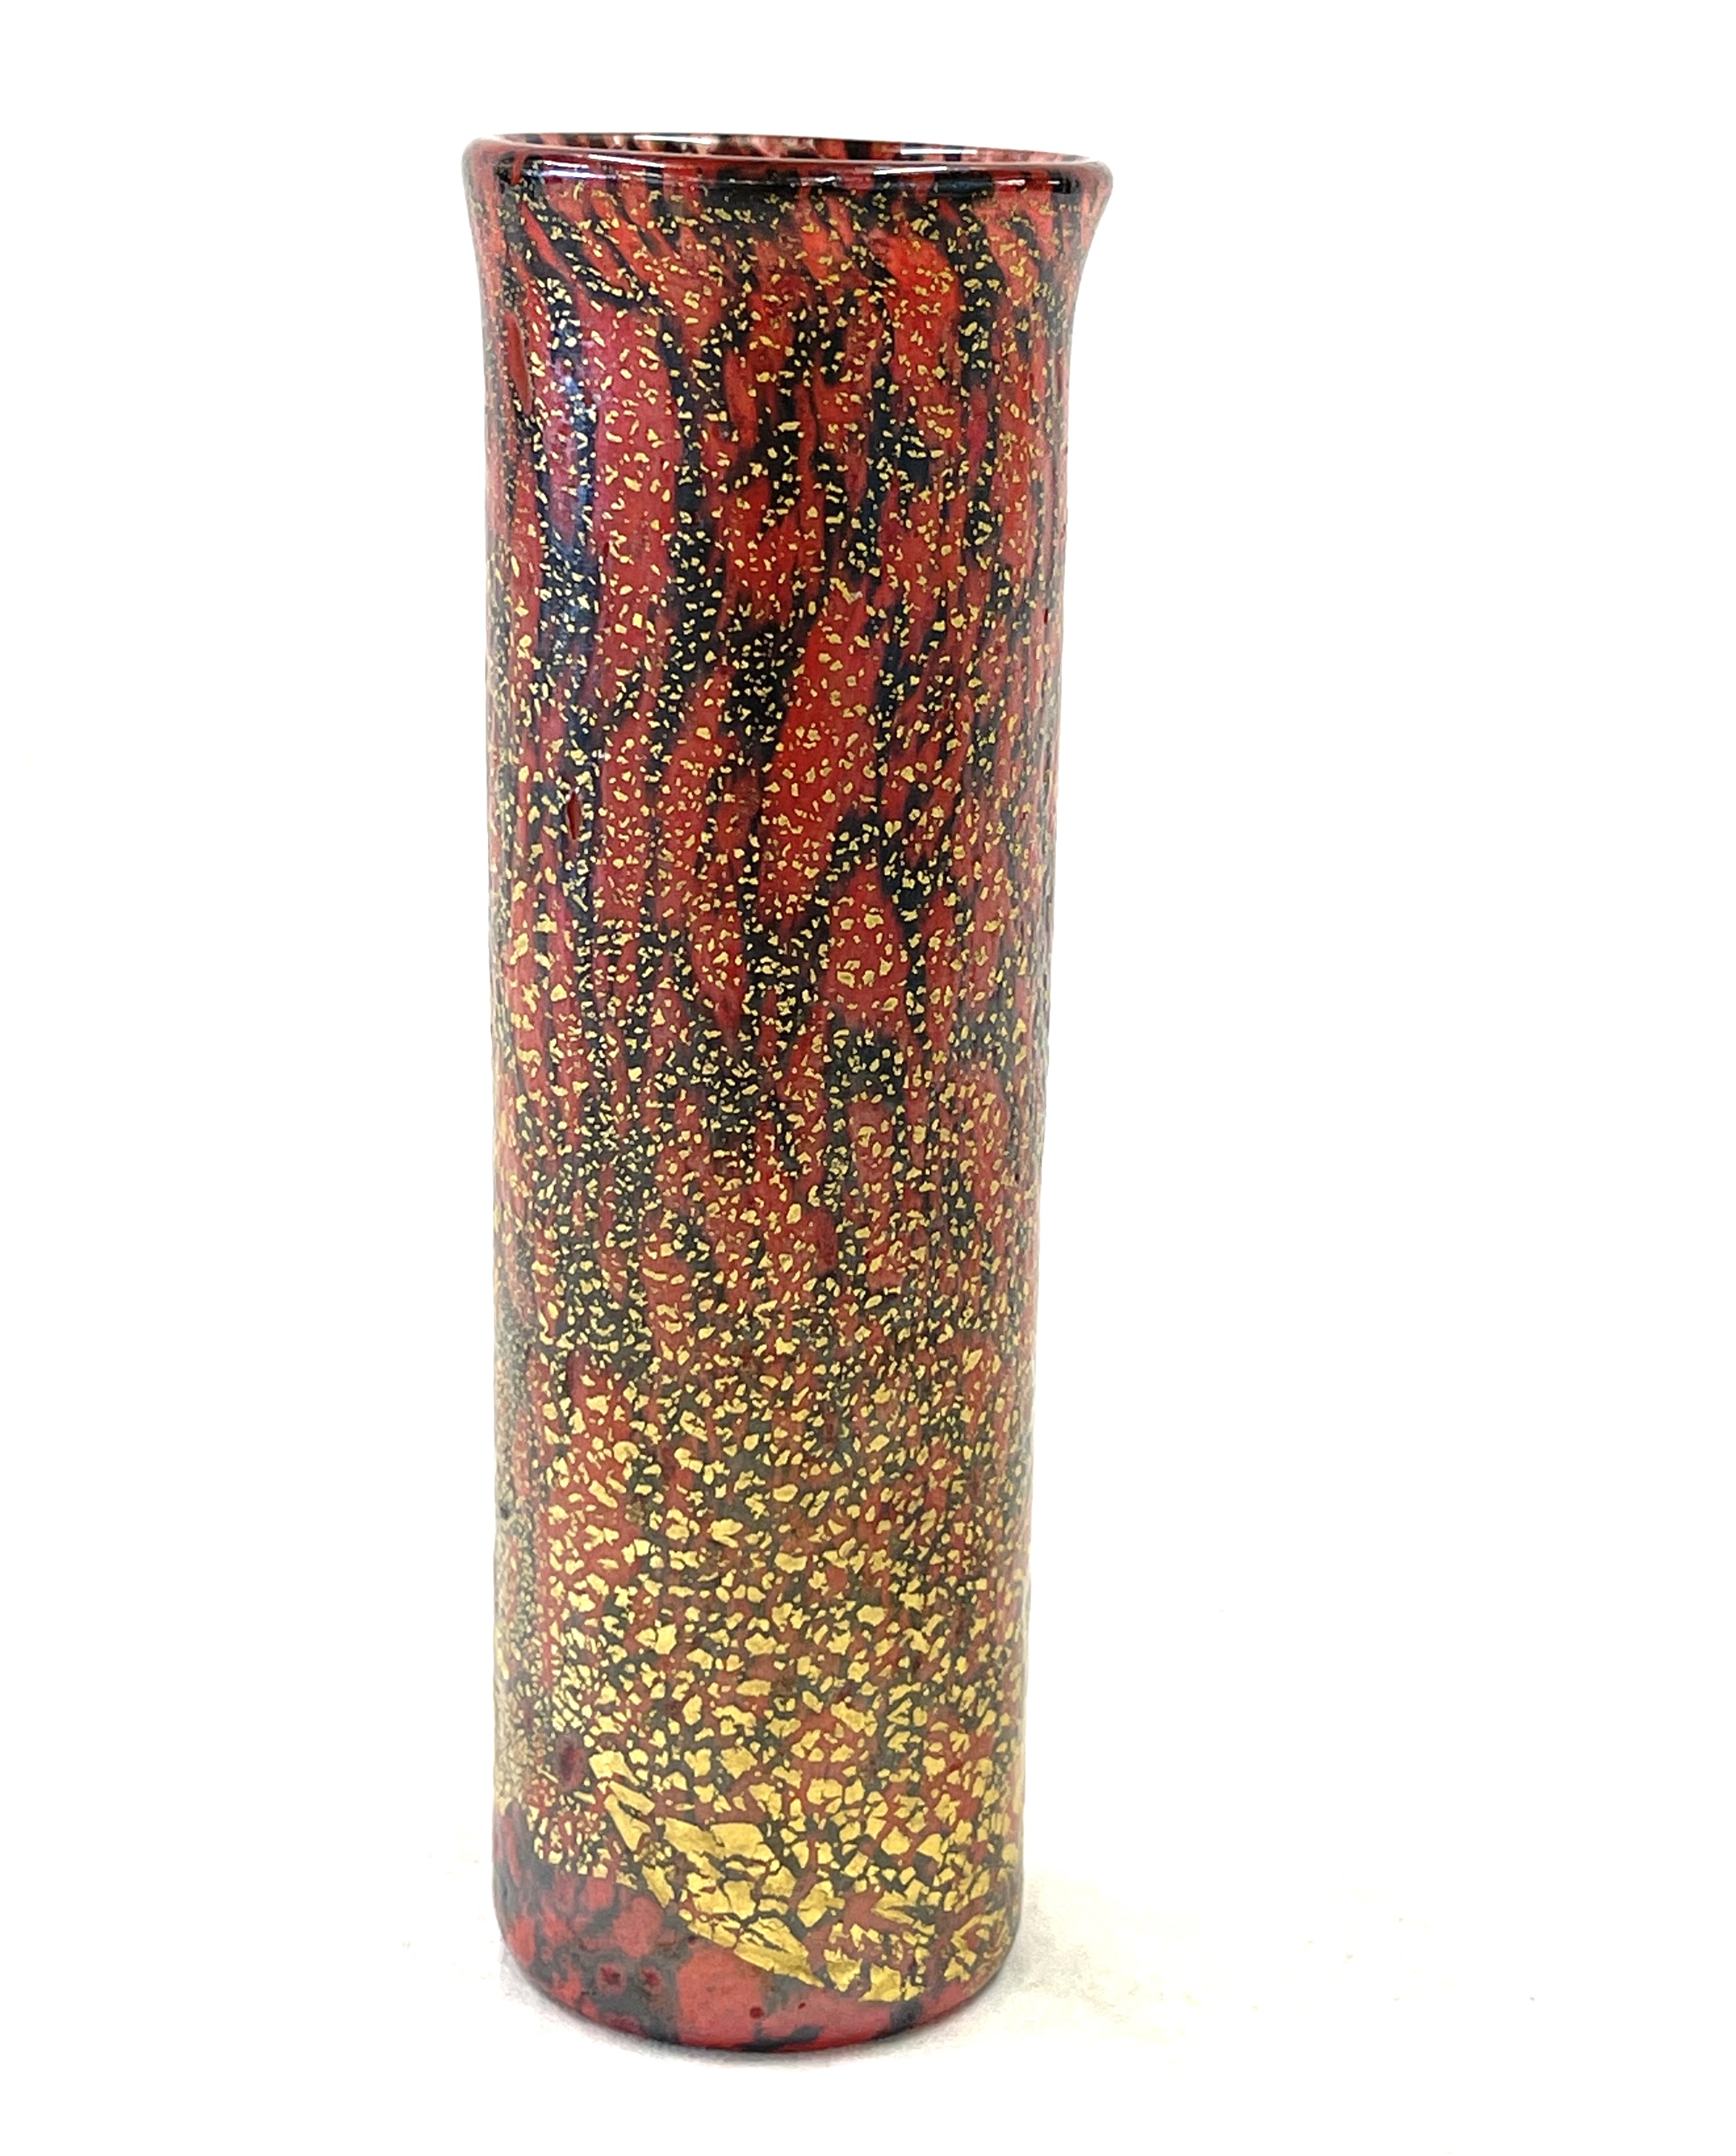 A very rare Isle of Wight Studio Glass 'Firecracker' cylinder vase, designed by Timothy Harris in